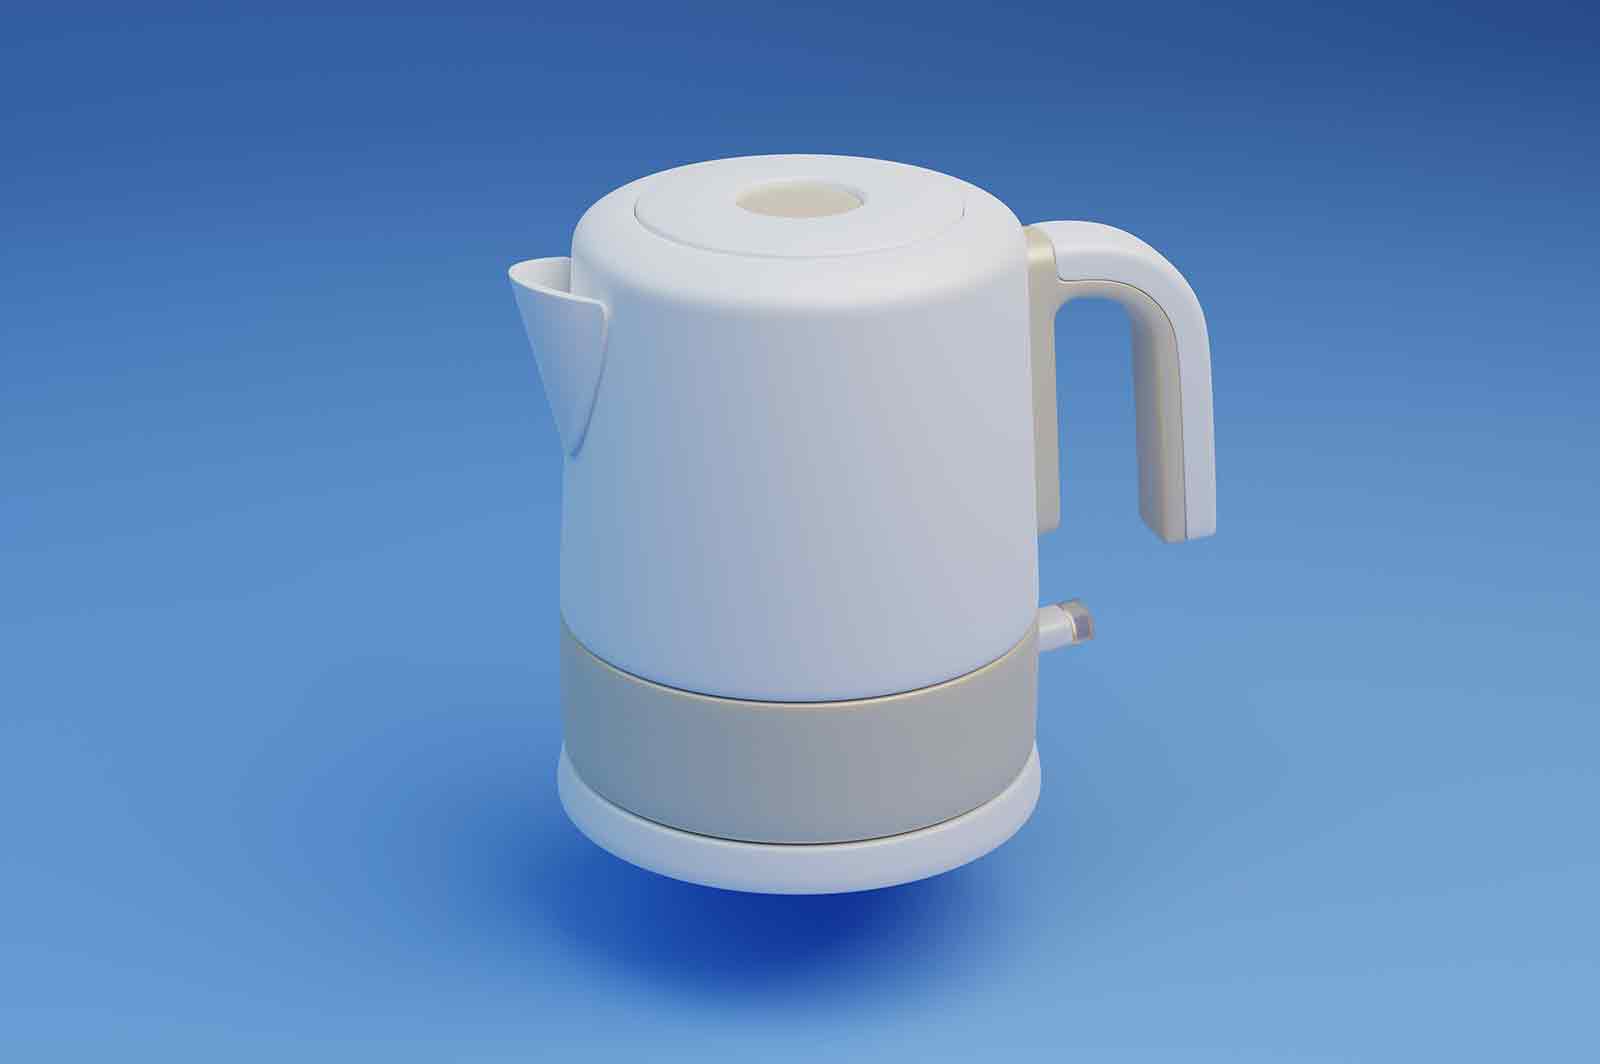 Electric kettle 3d rendered illustration. Household appliance, kitchenware equipment, modern teapots for boiling water